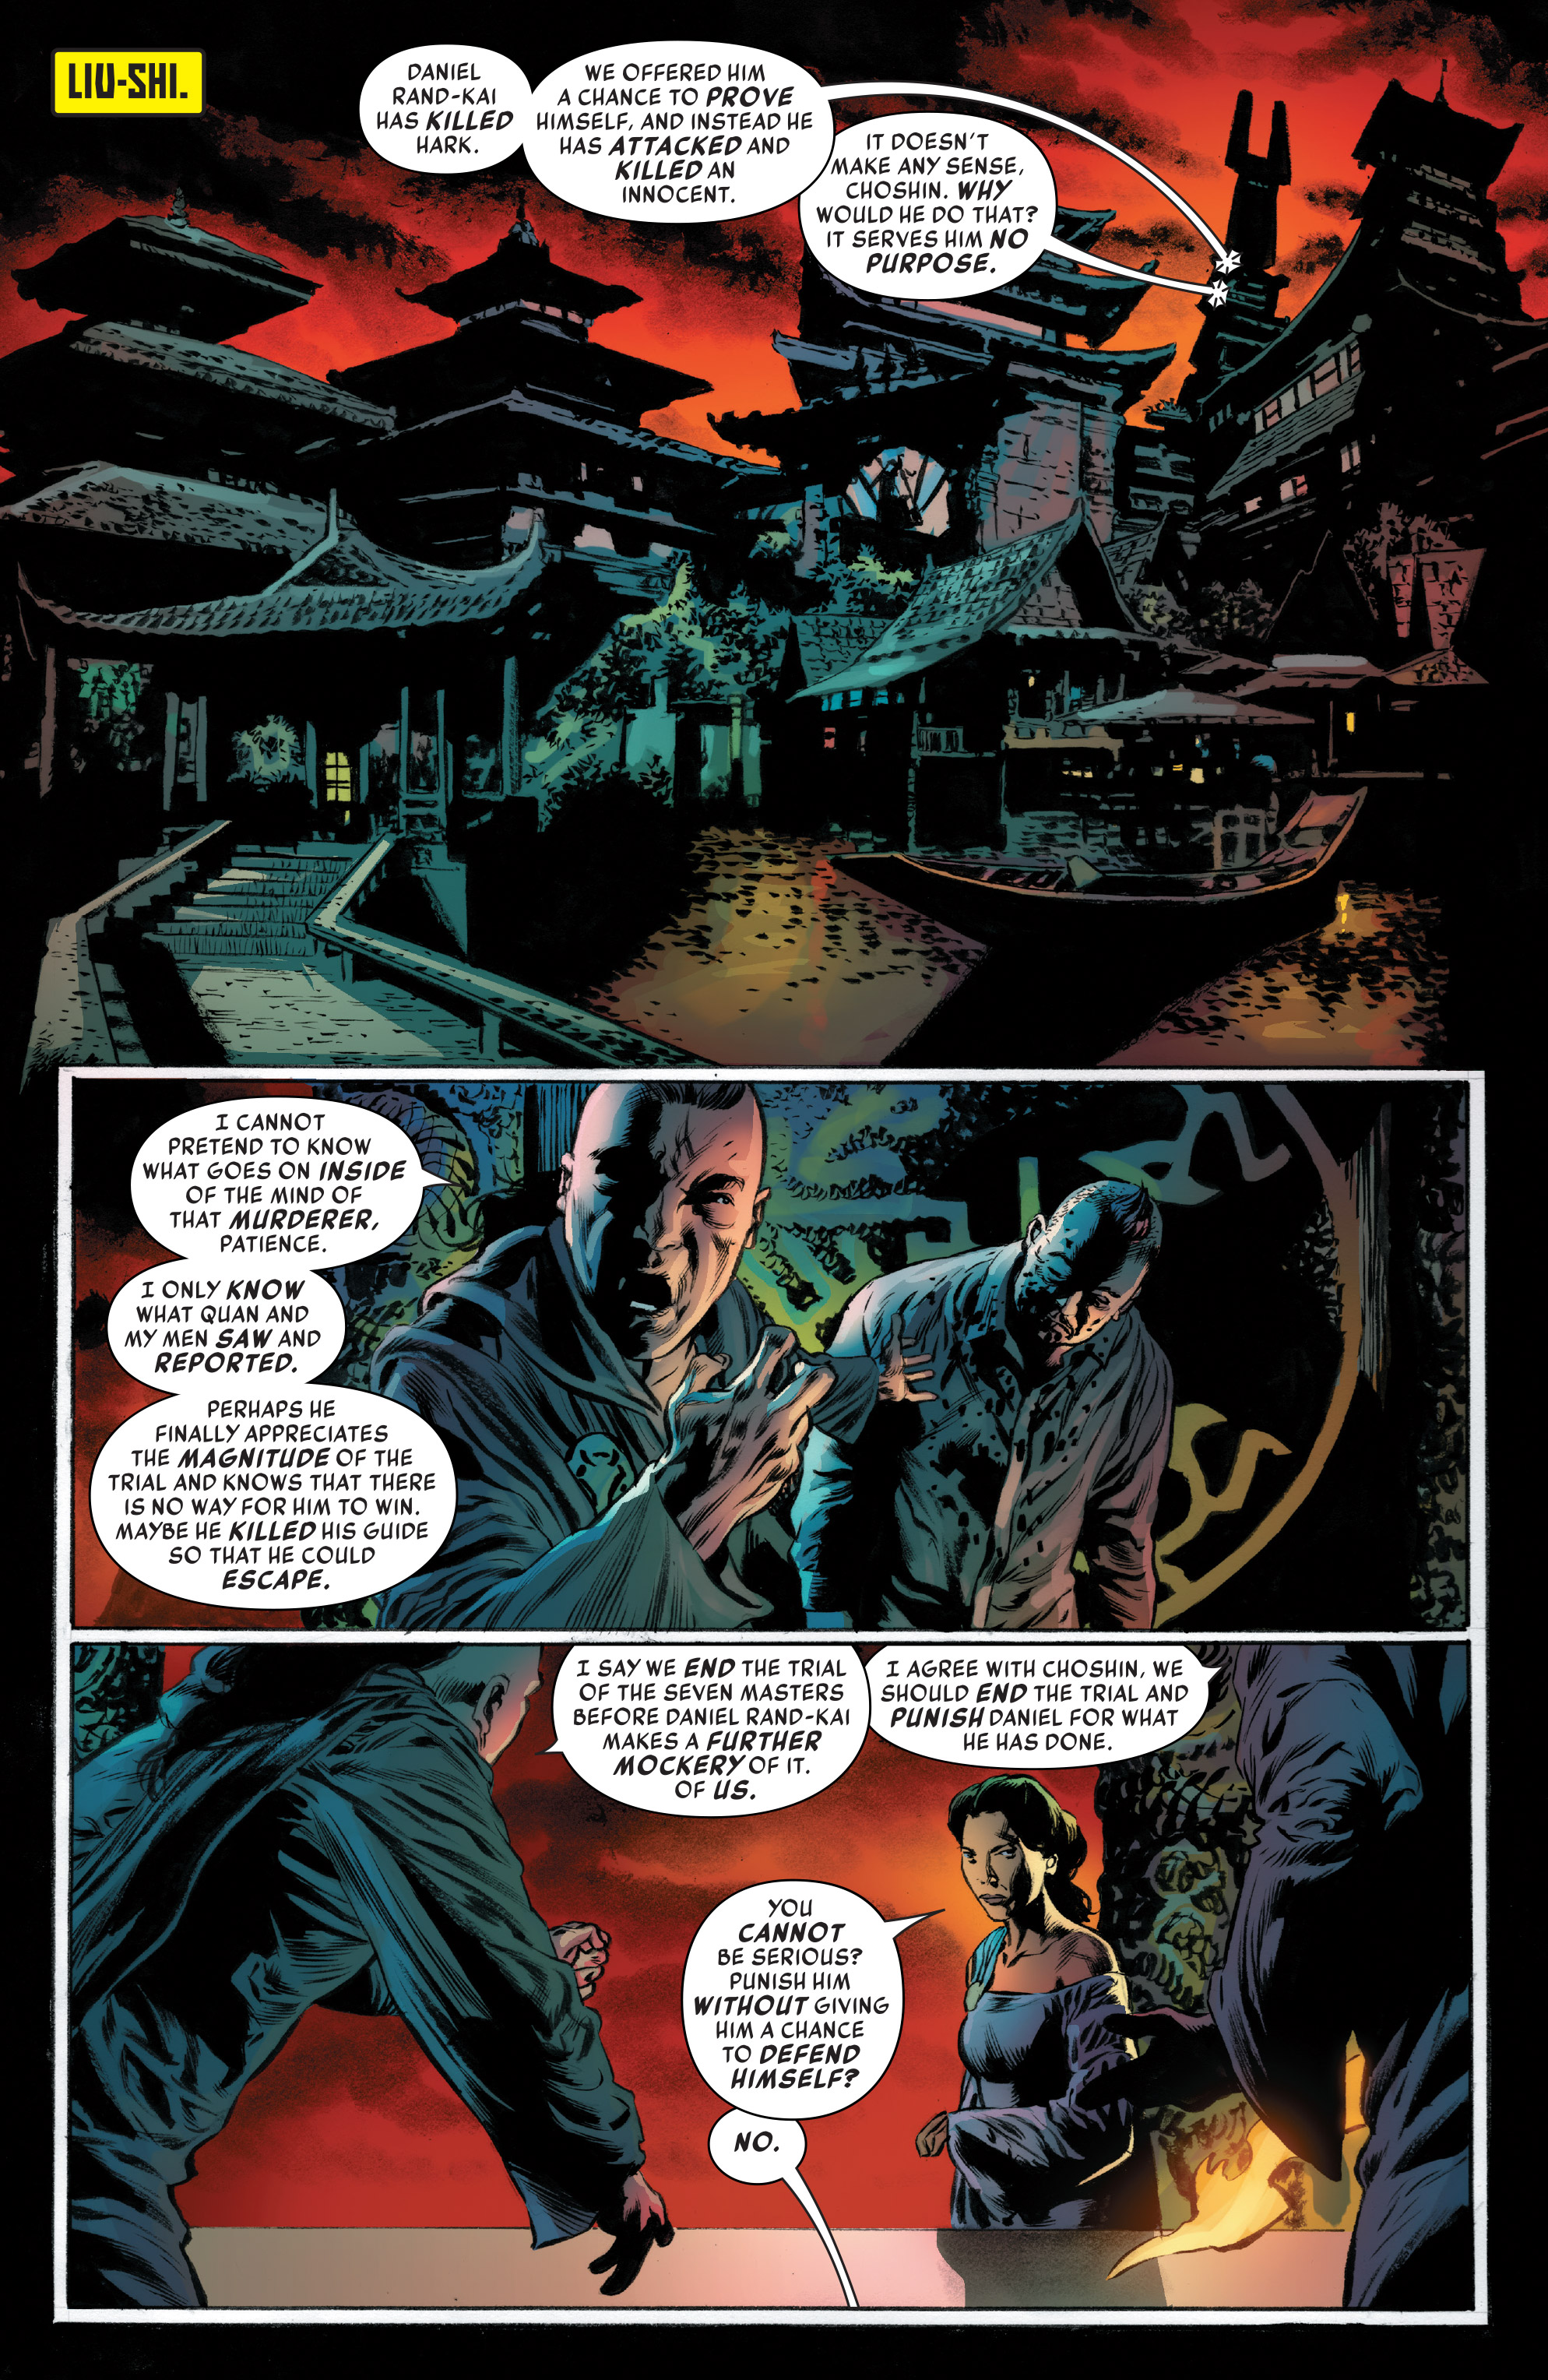 Iron Fist (2017-): Chapter 4 - Page 3